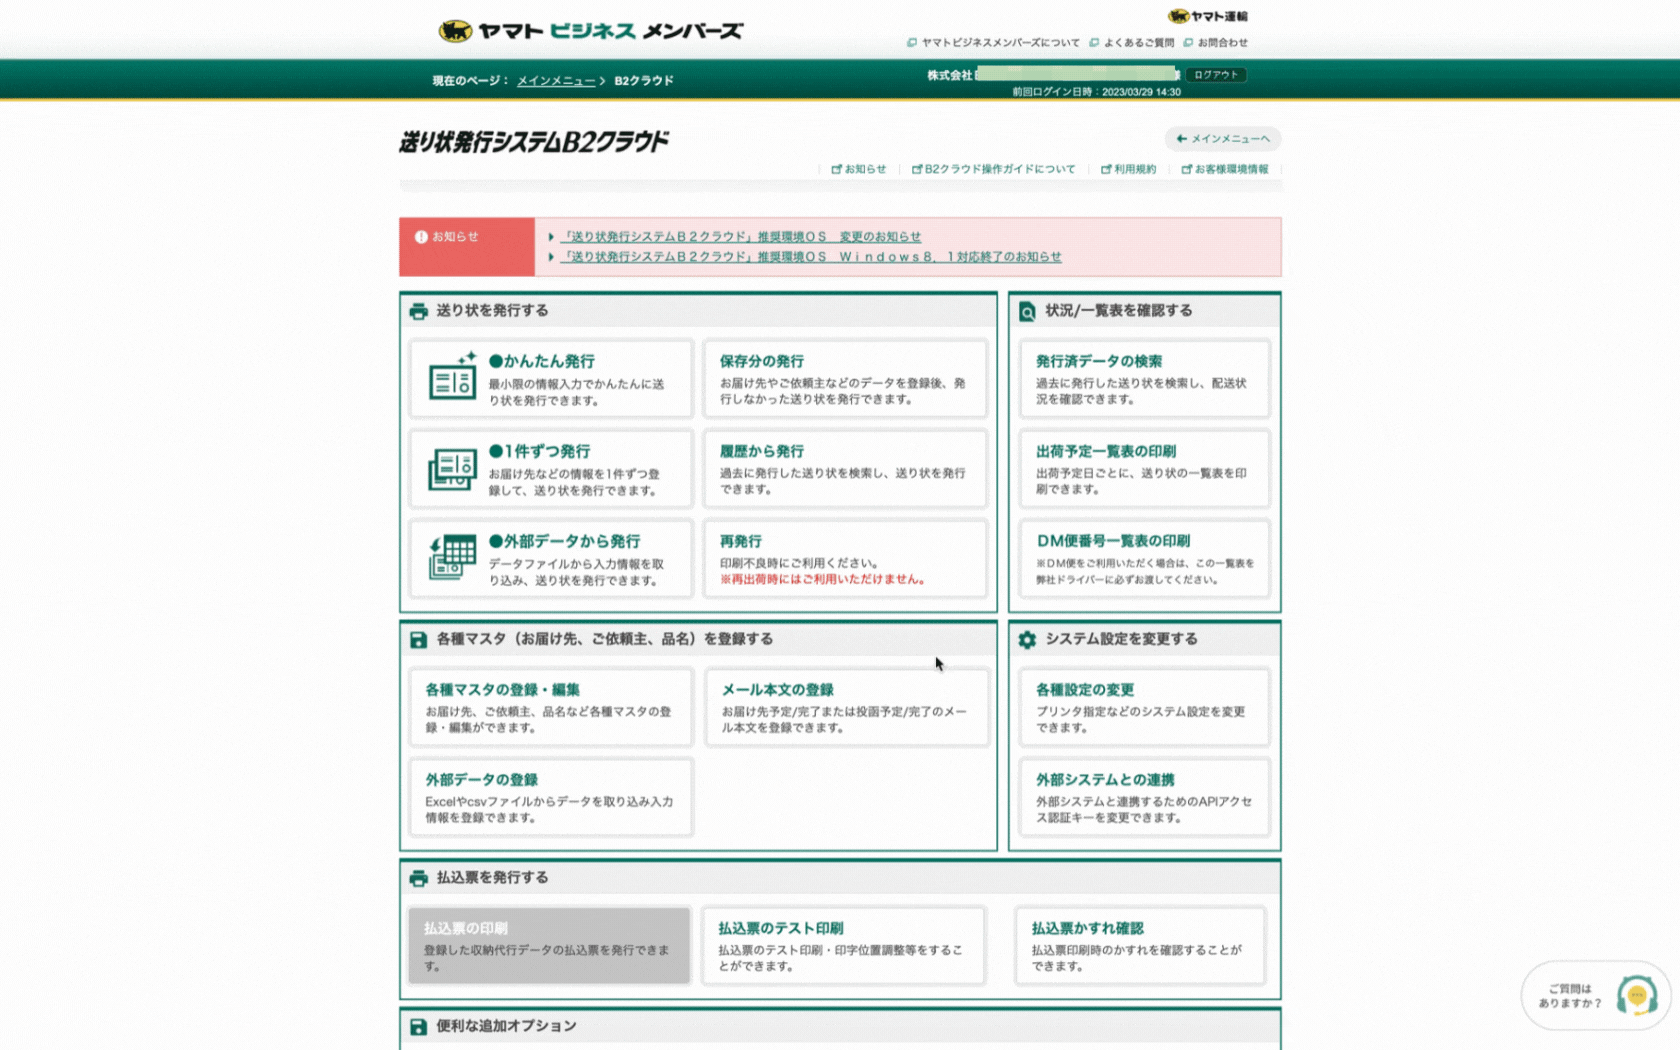 How to print the Sender's Copy (ご依頼主控) for Yamato Transport 